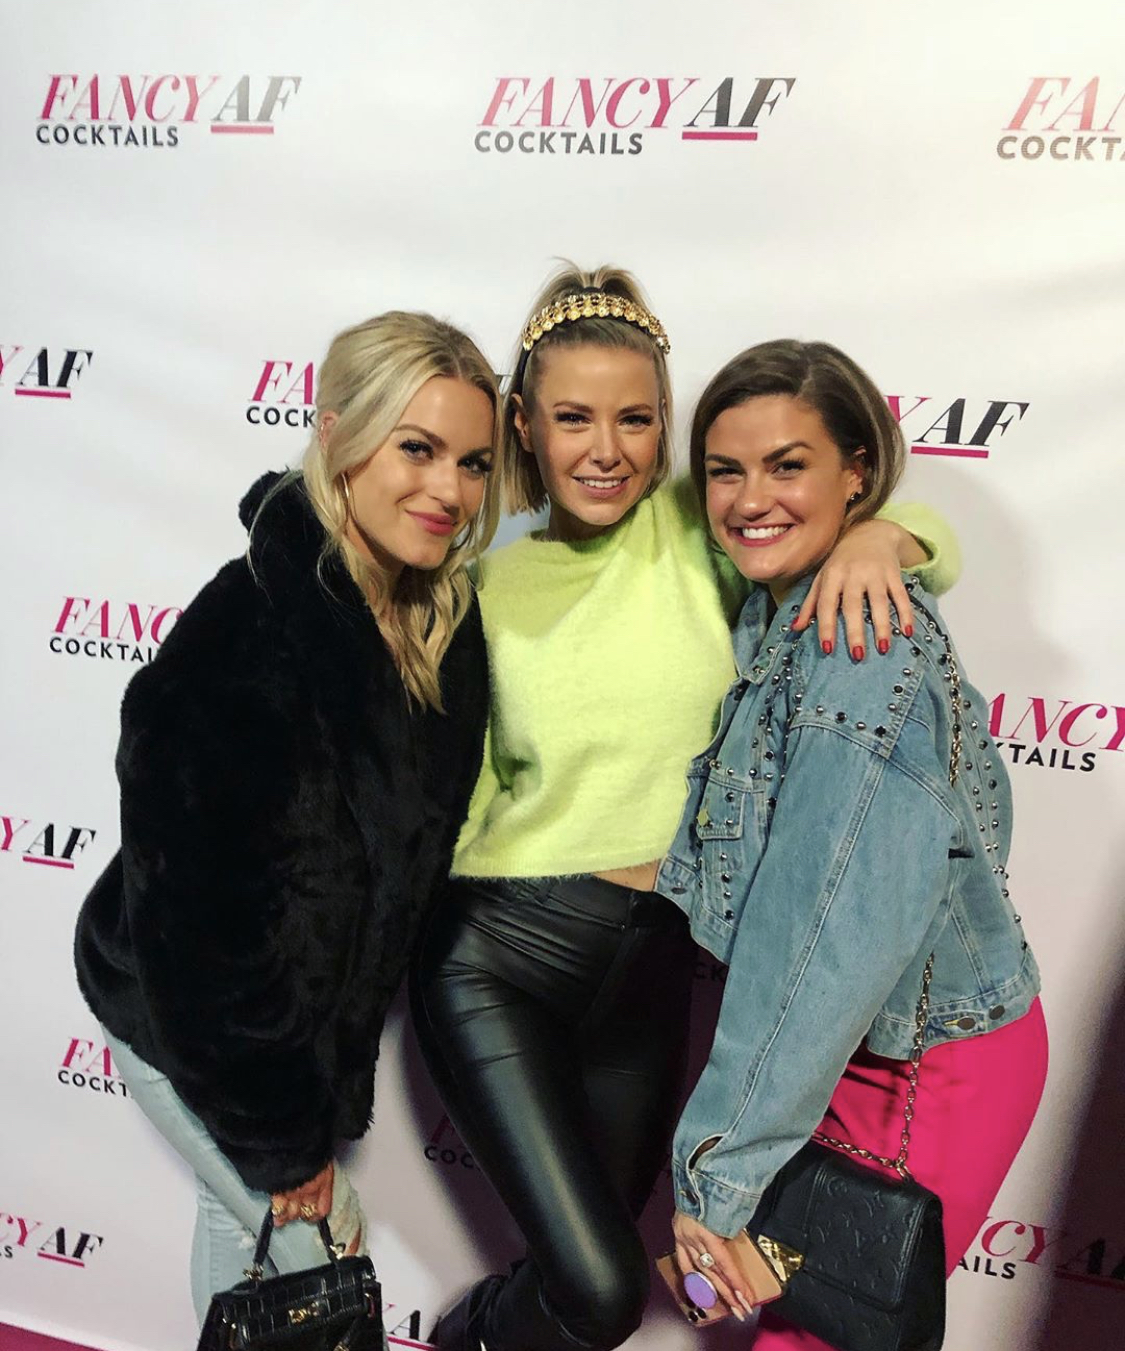 New Vanderpump Rules Cast Member Dayna Kathan With Ariana Madix & Brittany Cartwright